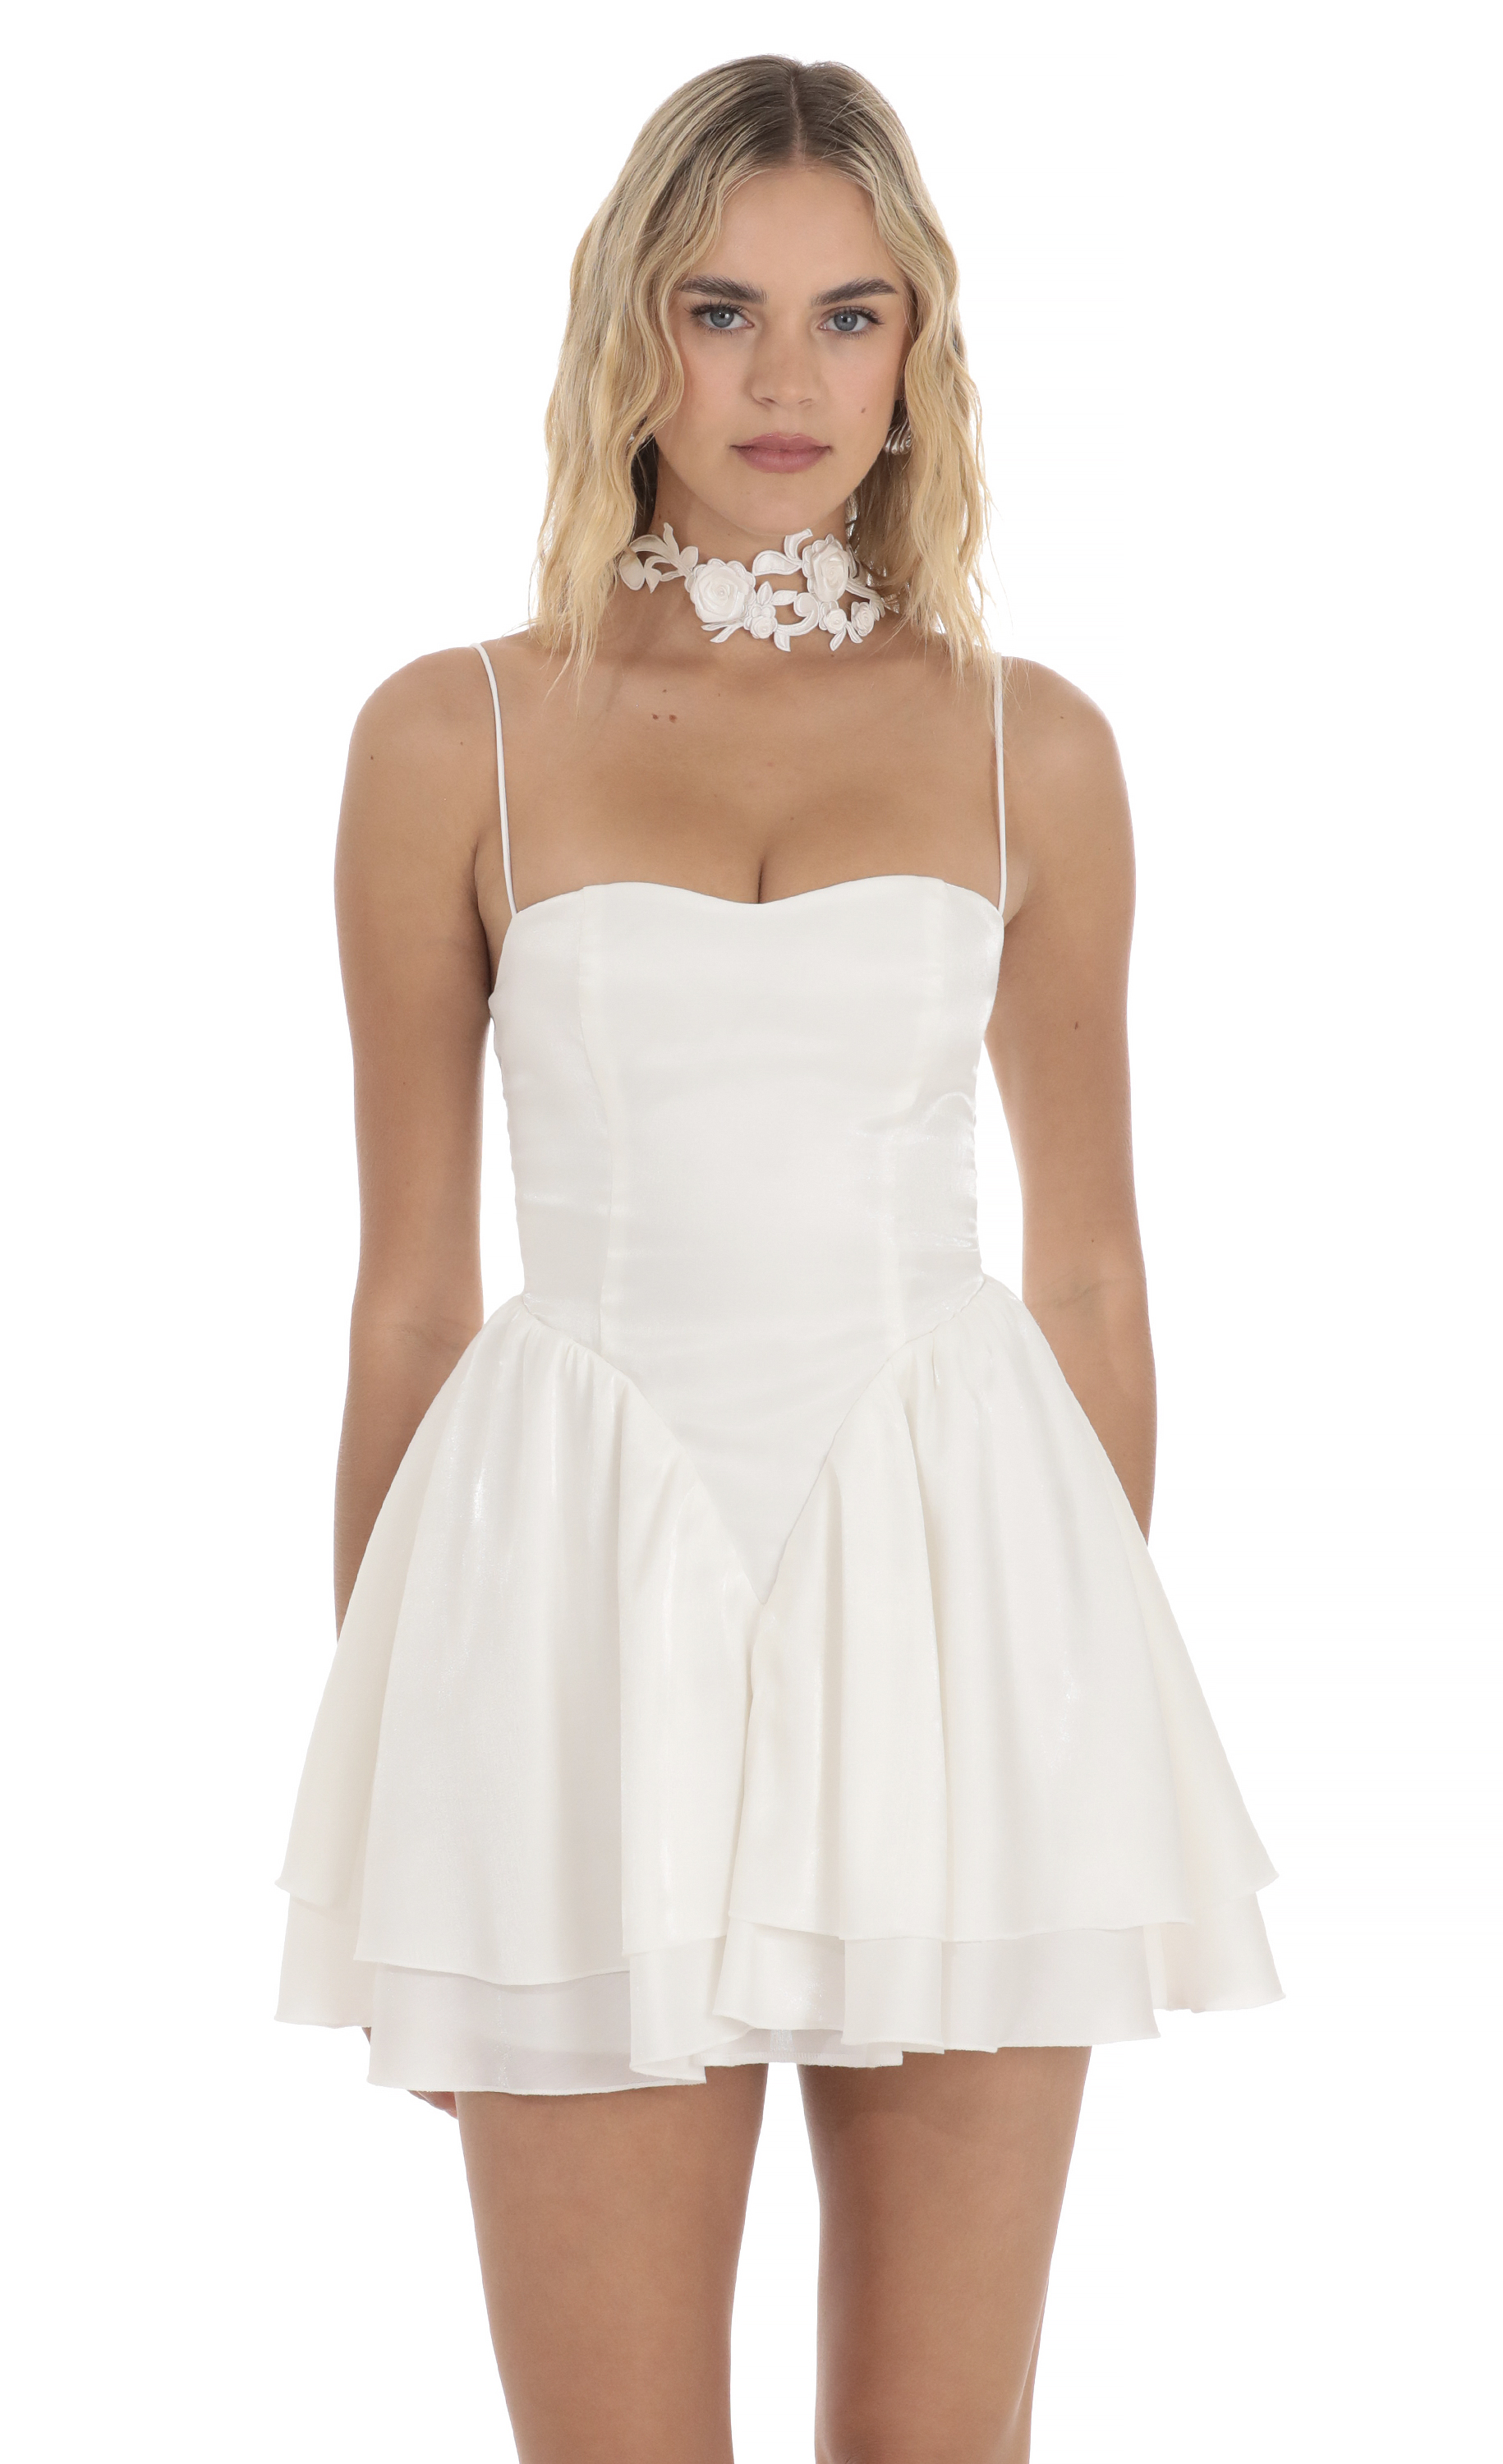 Shimmer Fit and Flare Dress in White